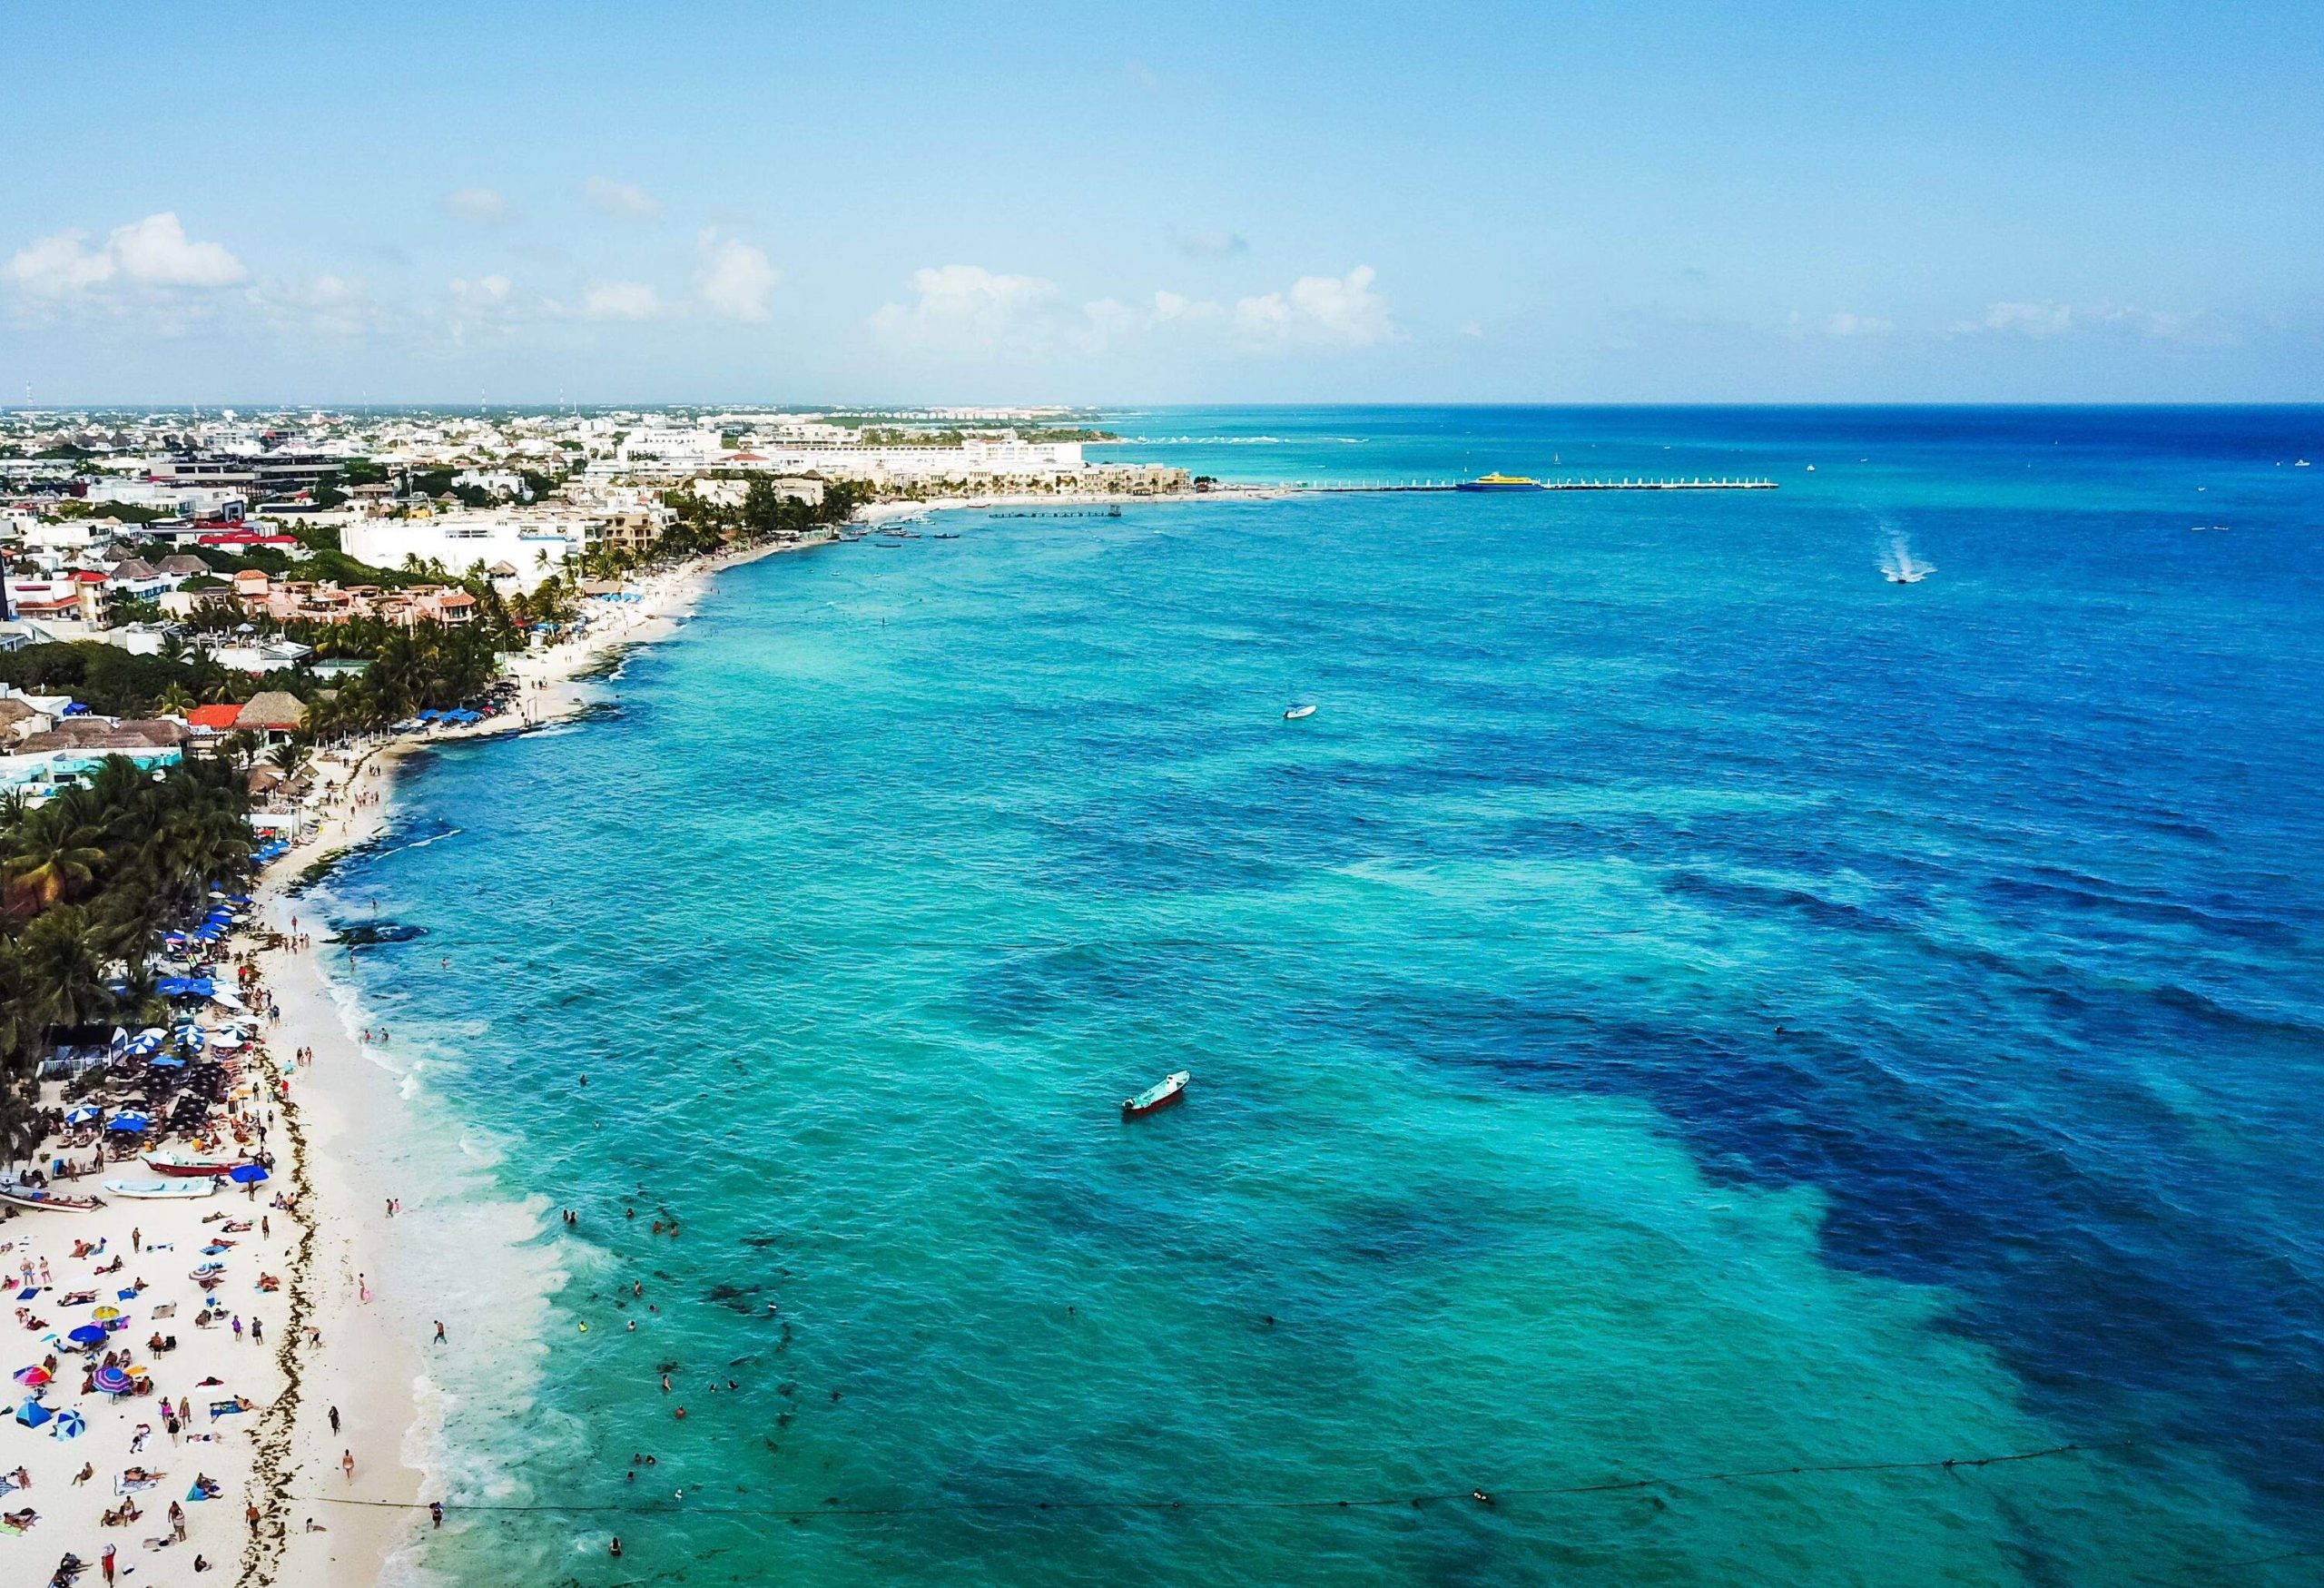 Aerial view of famous Playa del Carmen public beach in Quintana roo, Mexico